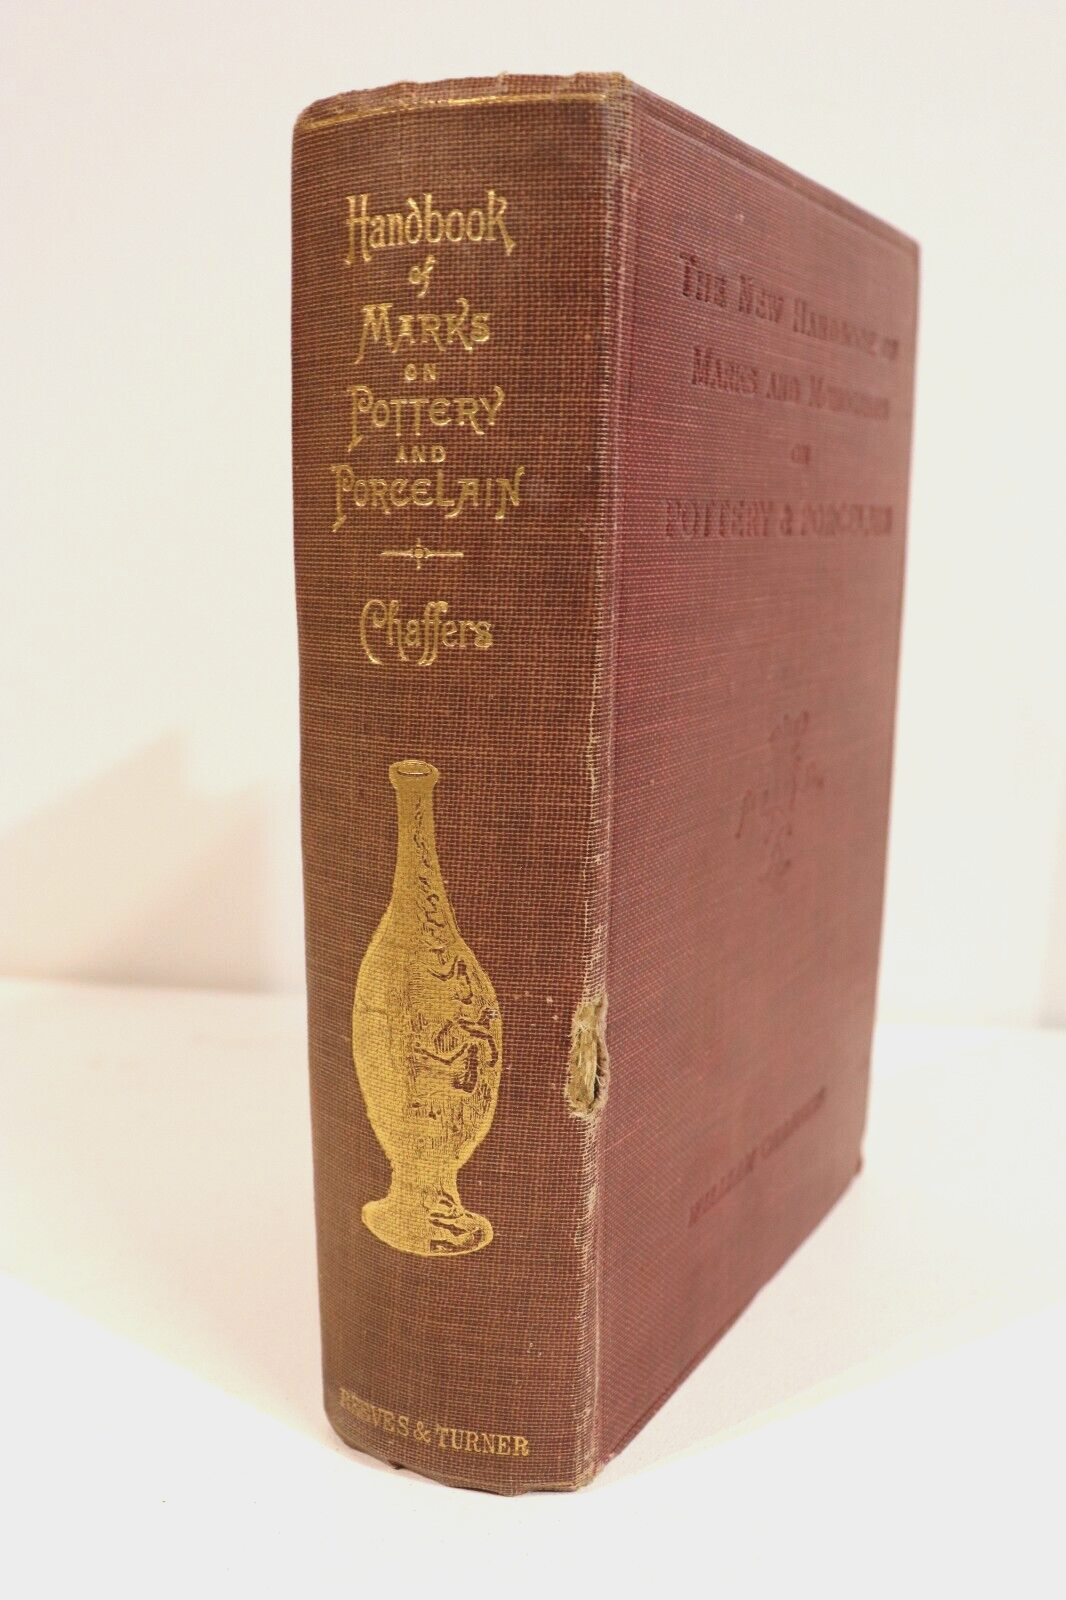 Marks & Monograms On Pottery & Porcelain - 1924 - Antique Reference Book